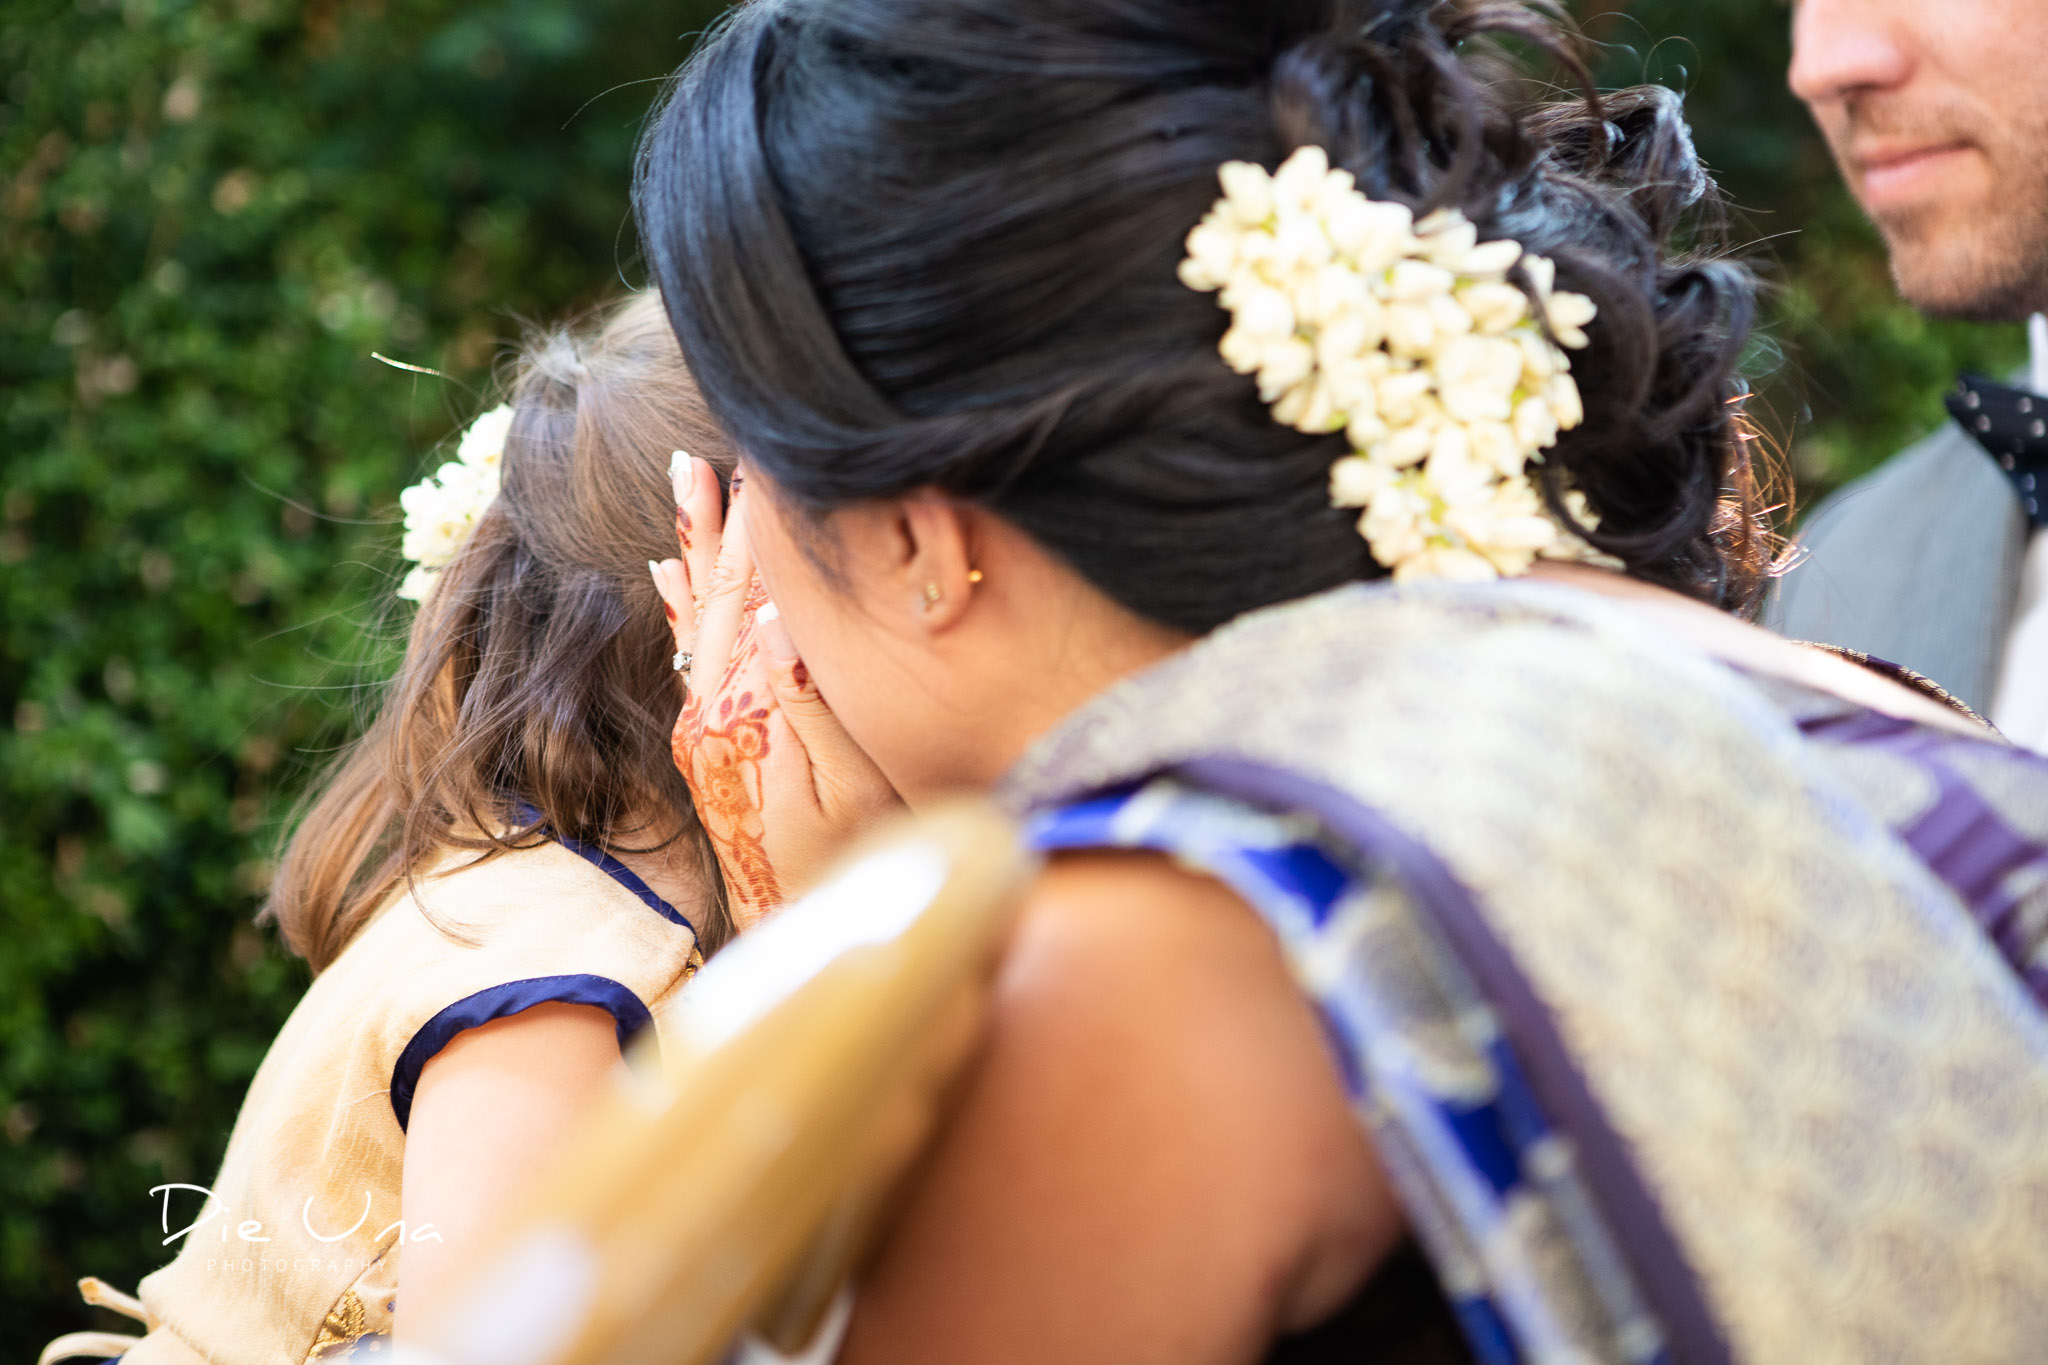 mom whispering to young duaghter during wedding ceremony.jpg